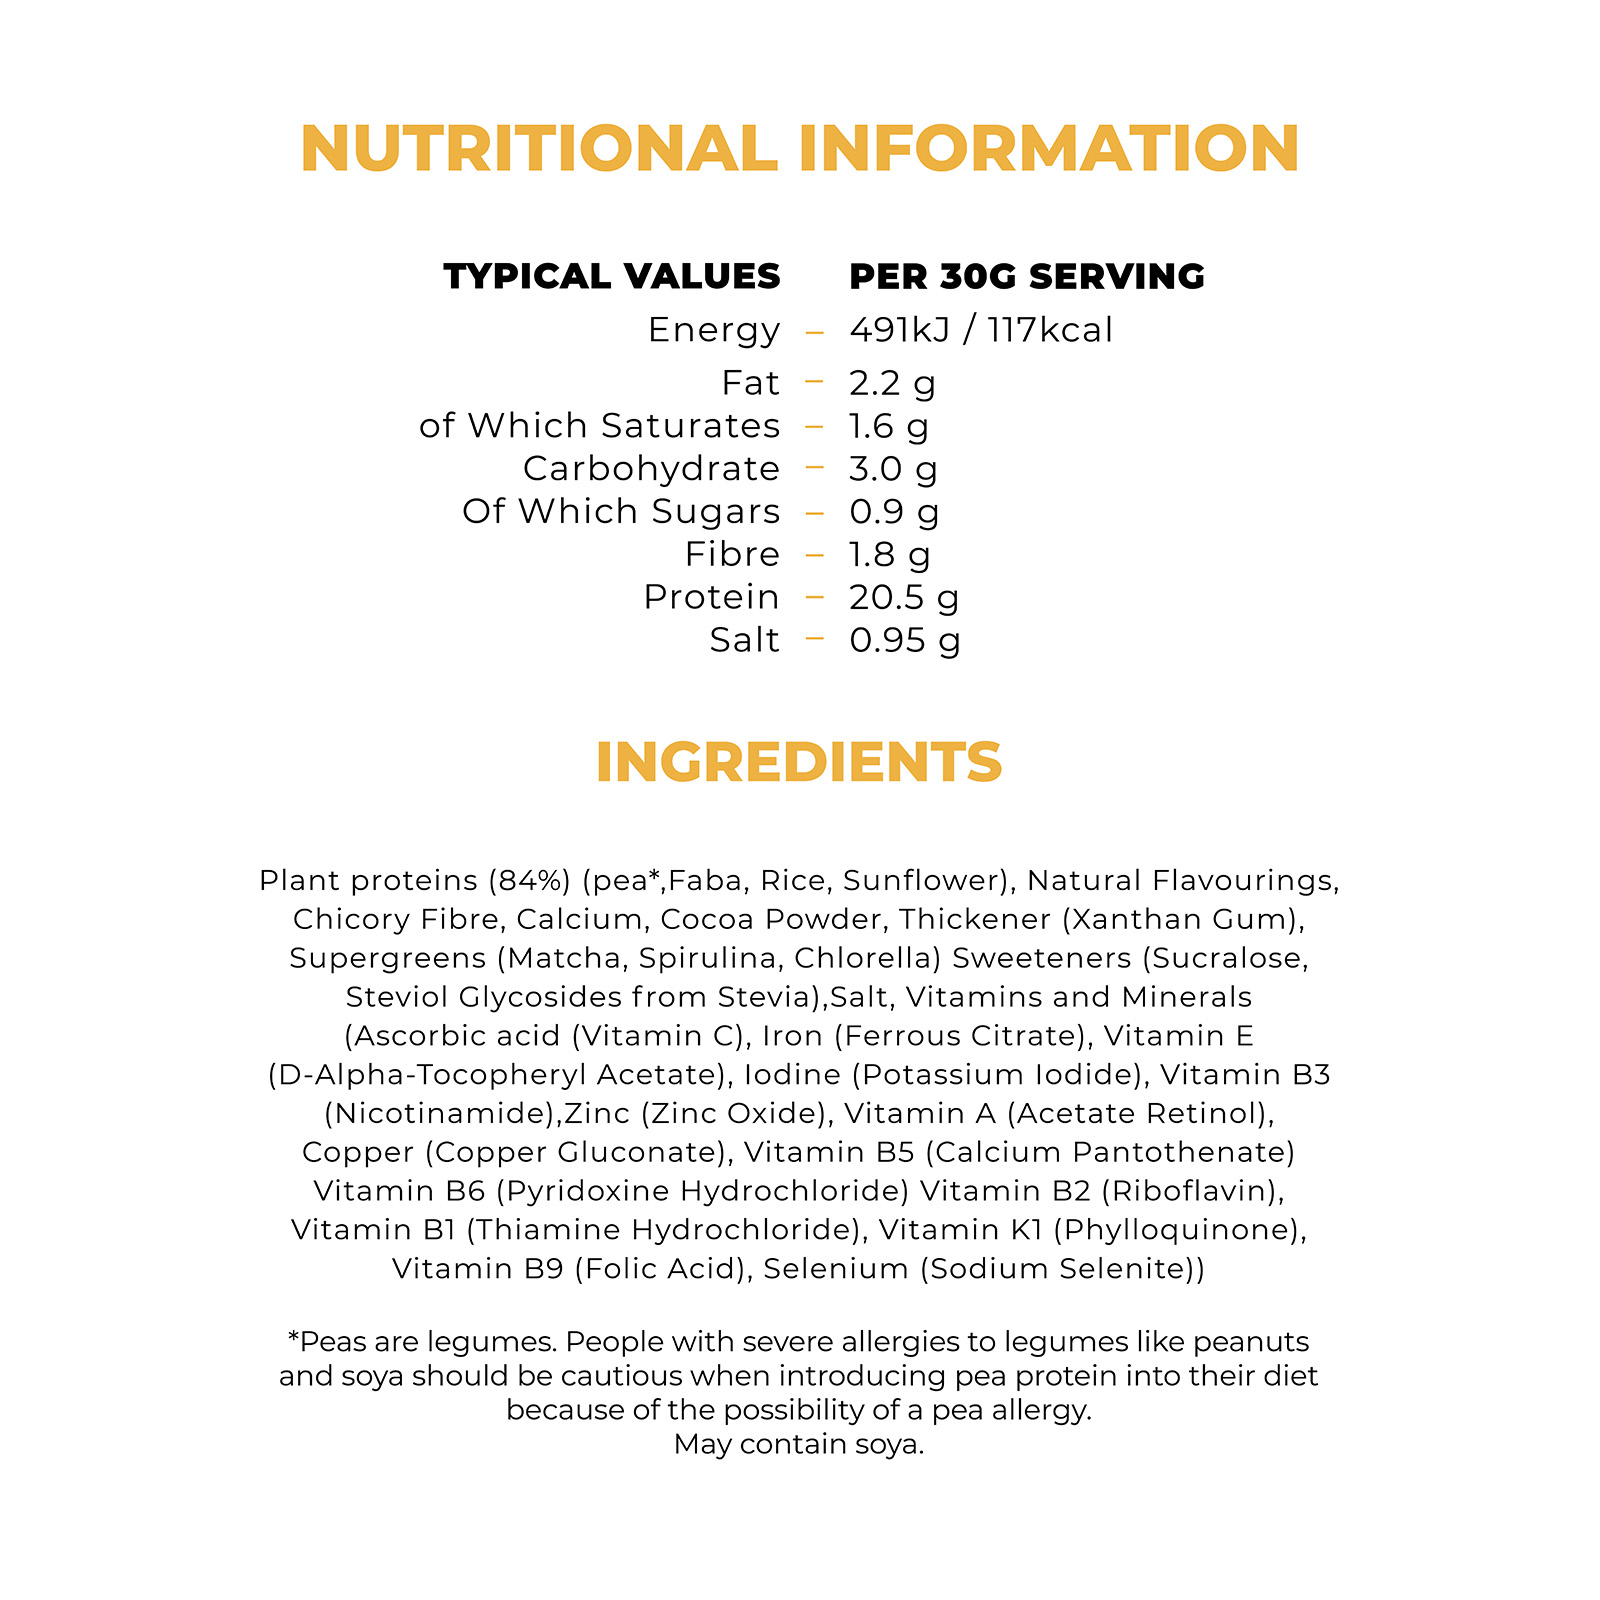  NUTRITIONAL INFORMATION TYPICAL VALUES PER 30G SERVING 491kJ / 117kcal Energy 2.2 g Fat 1.6 g of Which Saturates 3.0 g Carbohydrate 0.9 g Of Which Sugars 1.8 g Fibre 20.5 g Protein 0.95 g INGREDIENTS Plant proteins (84%) (pea, Faba, Rice, Sunflower), Natural Flavourings, Chicory Fibre, Calcium, Cocoa Powder, Thickener (Xanthan Gum), Supergreens (Matcha, Spirulina, Chlorella) Sweeteners (Sucralose, Steviol Glycosides from Stevia), Salt, Vitamins and Minerals (Ascorbic acid (Vitamin C), Iron (Ferrous Citrate), Vitamin E (D-Alpha-Tocopheryl Acetate), lodine (Potassium lodide), Vitamin B3 (Nicotinamide), Zinc (Zinc Oxide), Vitamin A (Acetate Retinol), Copper (Copper Gluconate), Vitamin B5 (Calcium Pantothenate) Vitamin B6 (Pyridoxine Hydrochloride) Vitamin B2 (Riboflavin), 
                          Vitamin B1 (Thiamine Hydrochloride), Vitamin K1 (Phylloquinone), Vitamin B9 (Folic Acid), Selenium (Sodium Selenite) Peas are legumes. People with severe allergies to legumes like peanuts and soya should be cautious when introducing pea protein into their diet because of the possibility of a pea allergy. May contain soya.